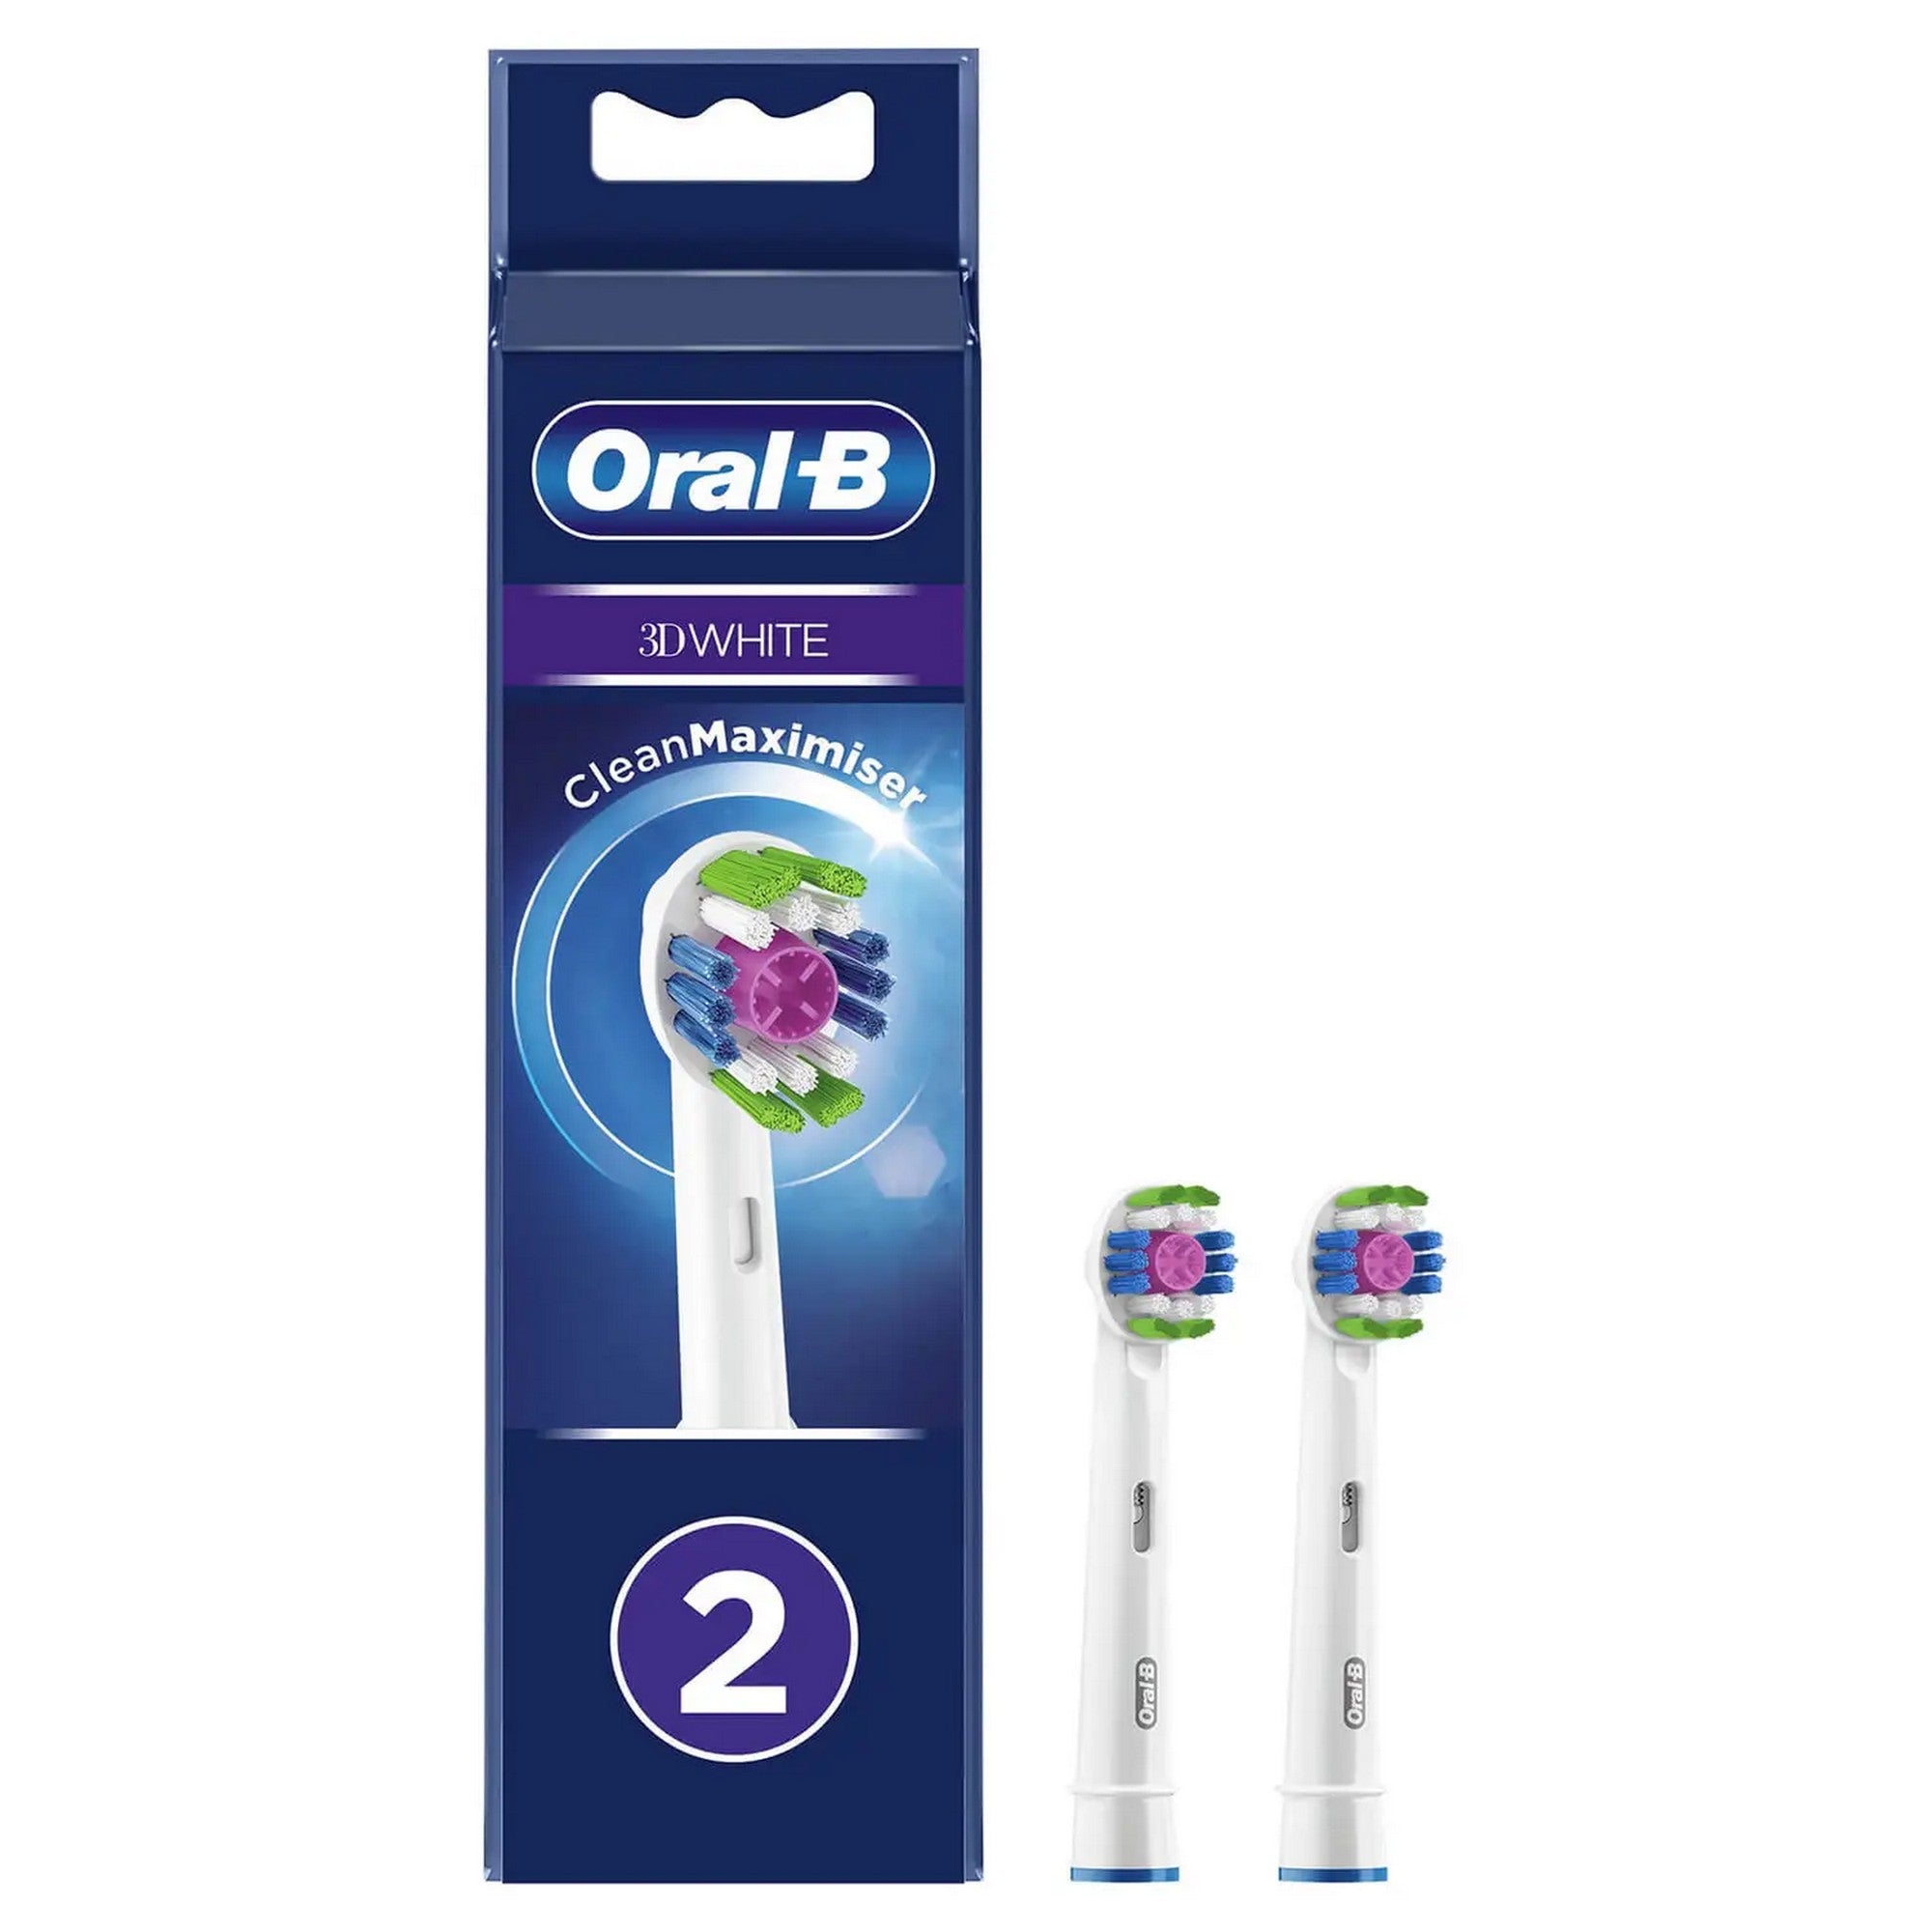 ORAL B 3D WHITE REFILL HEADS 2 PACK